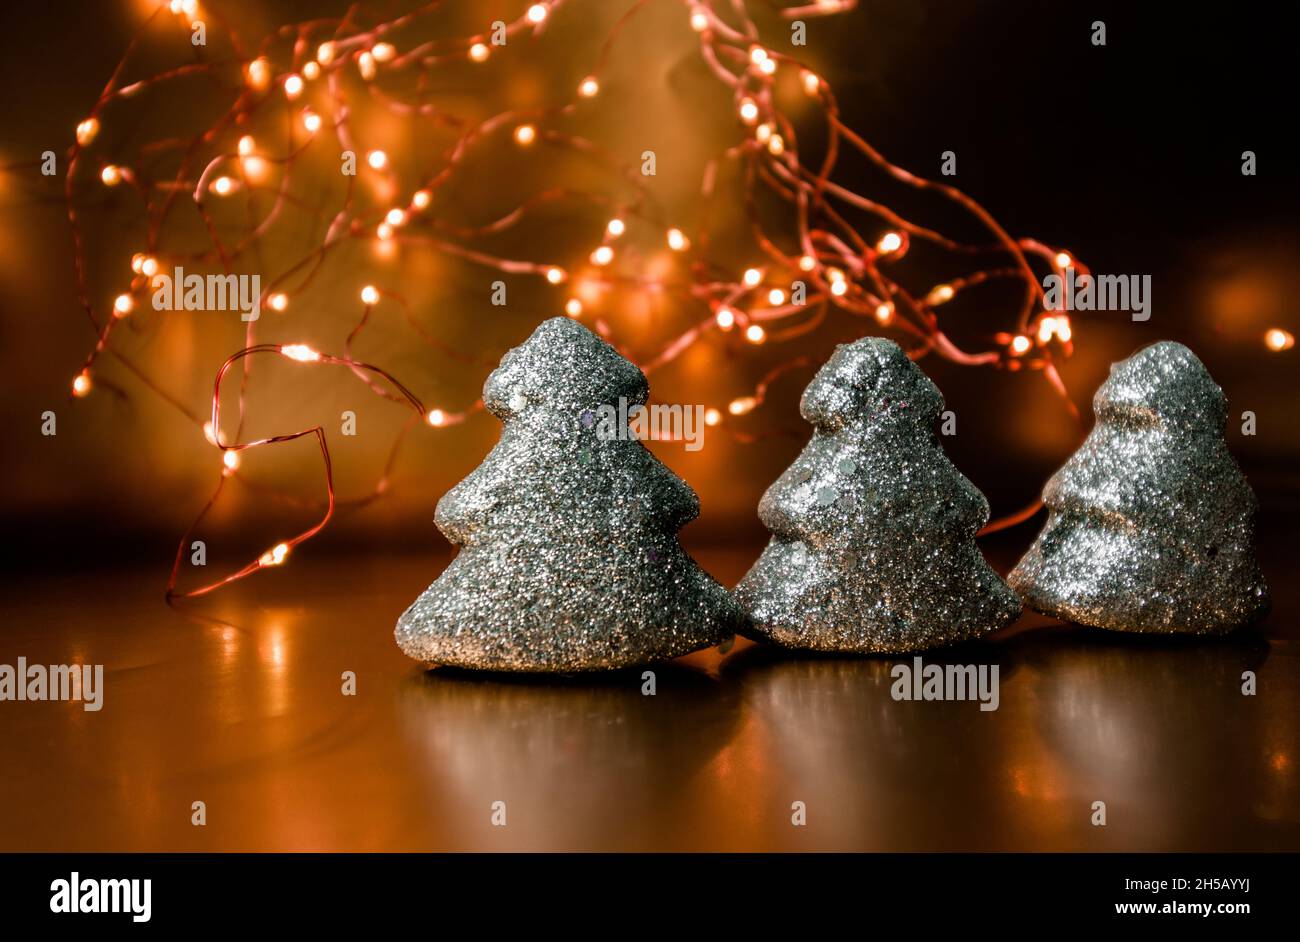 Three christmas toy shining trees on a gold background with lights. Stock Photo